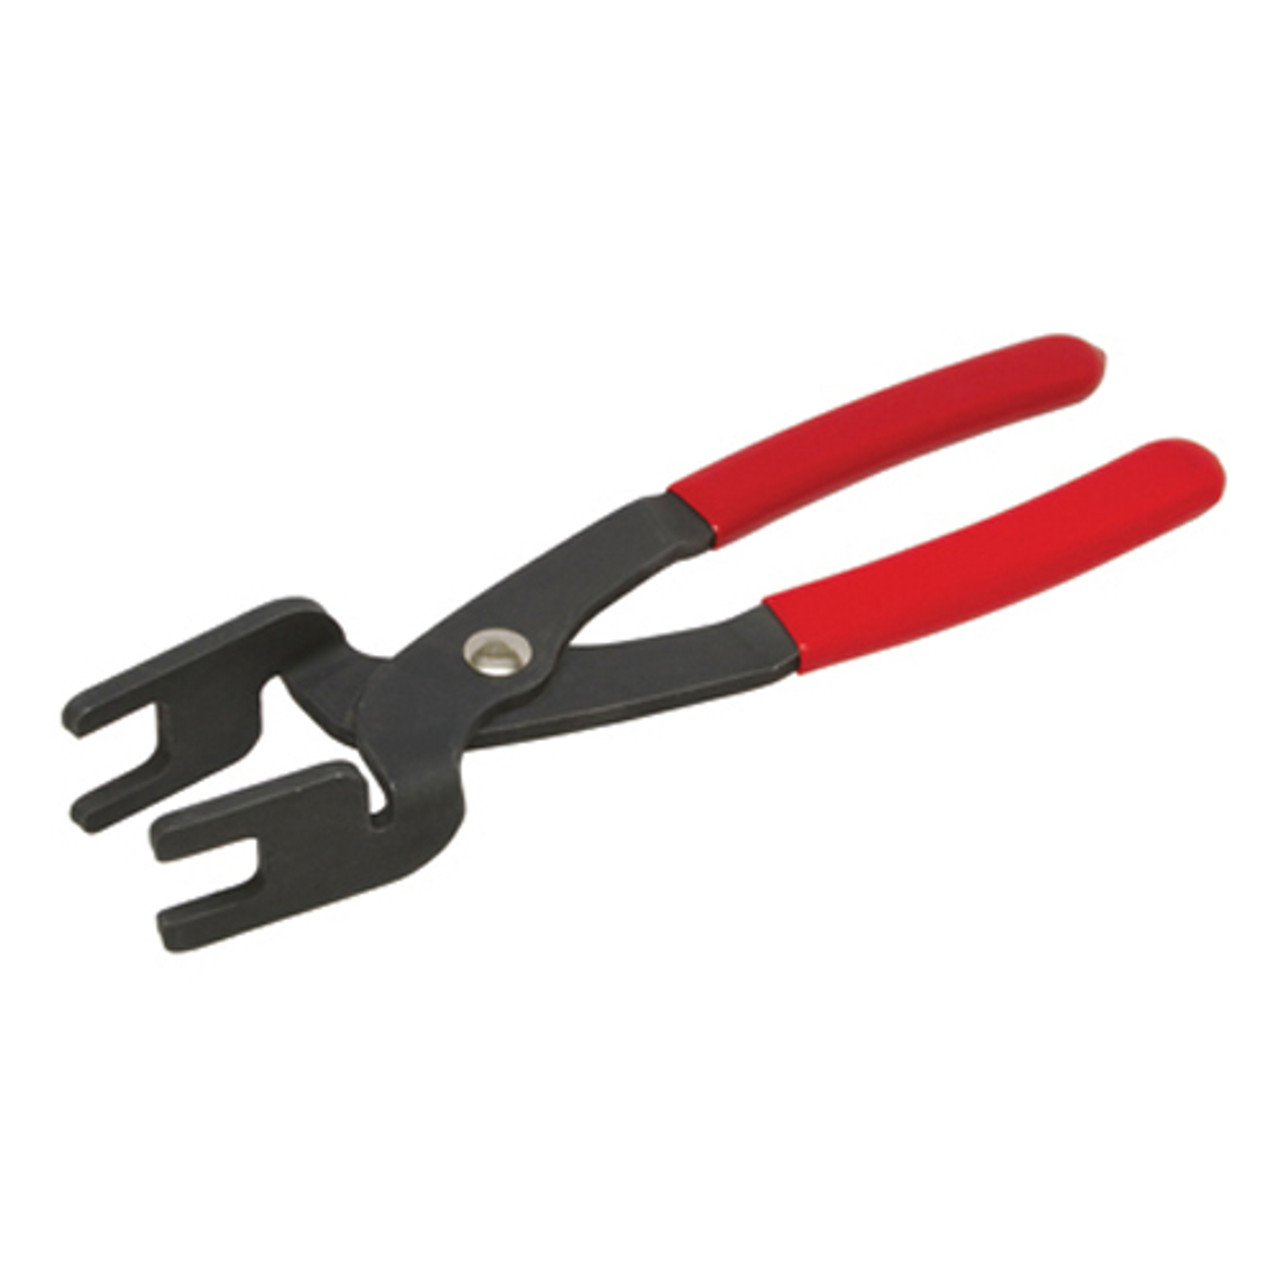 Lisle 37300 Fuel and A/C Disconnect Pliers